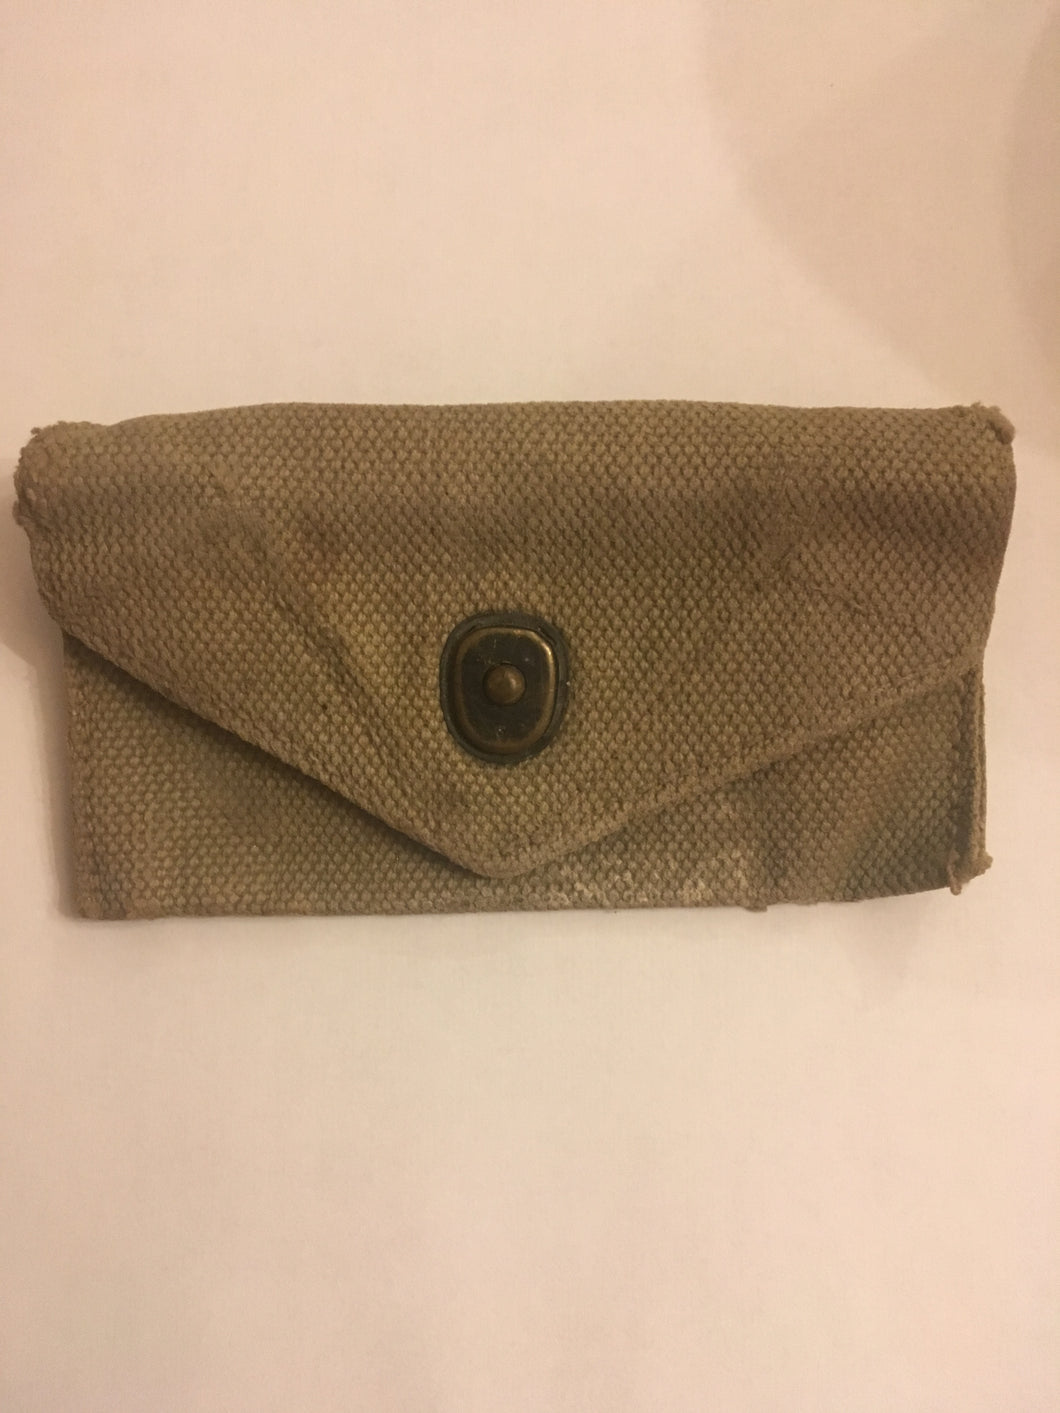 Vintage Early Military First Aid Pouch (Without Contents)